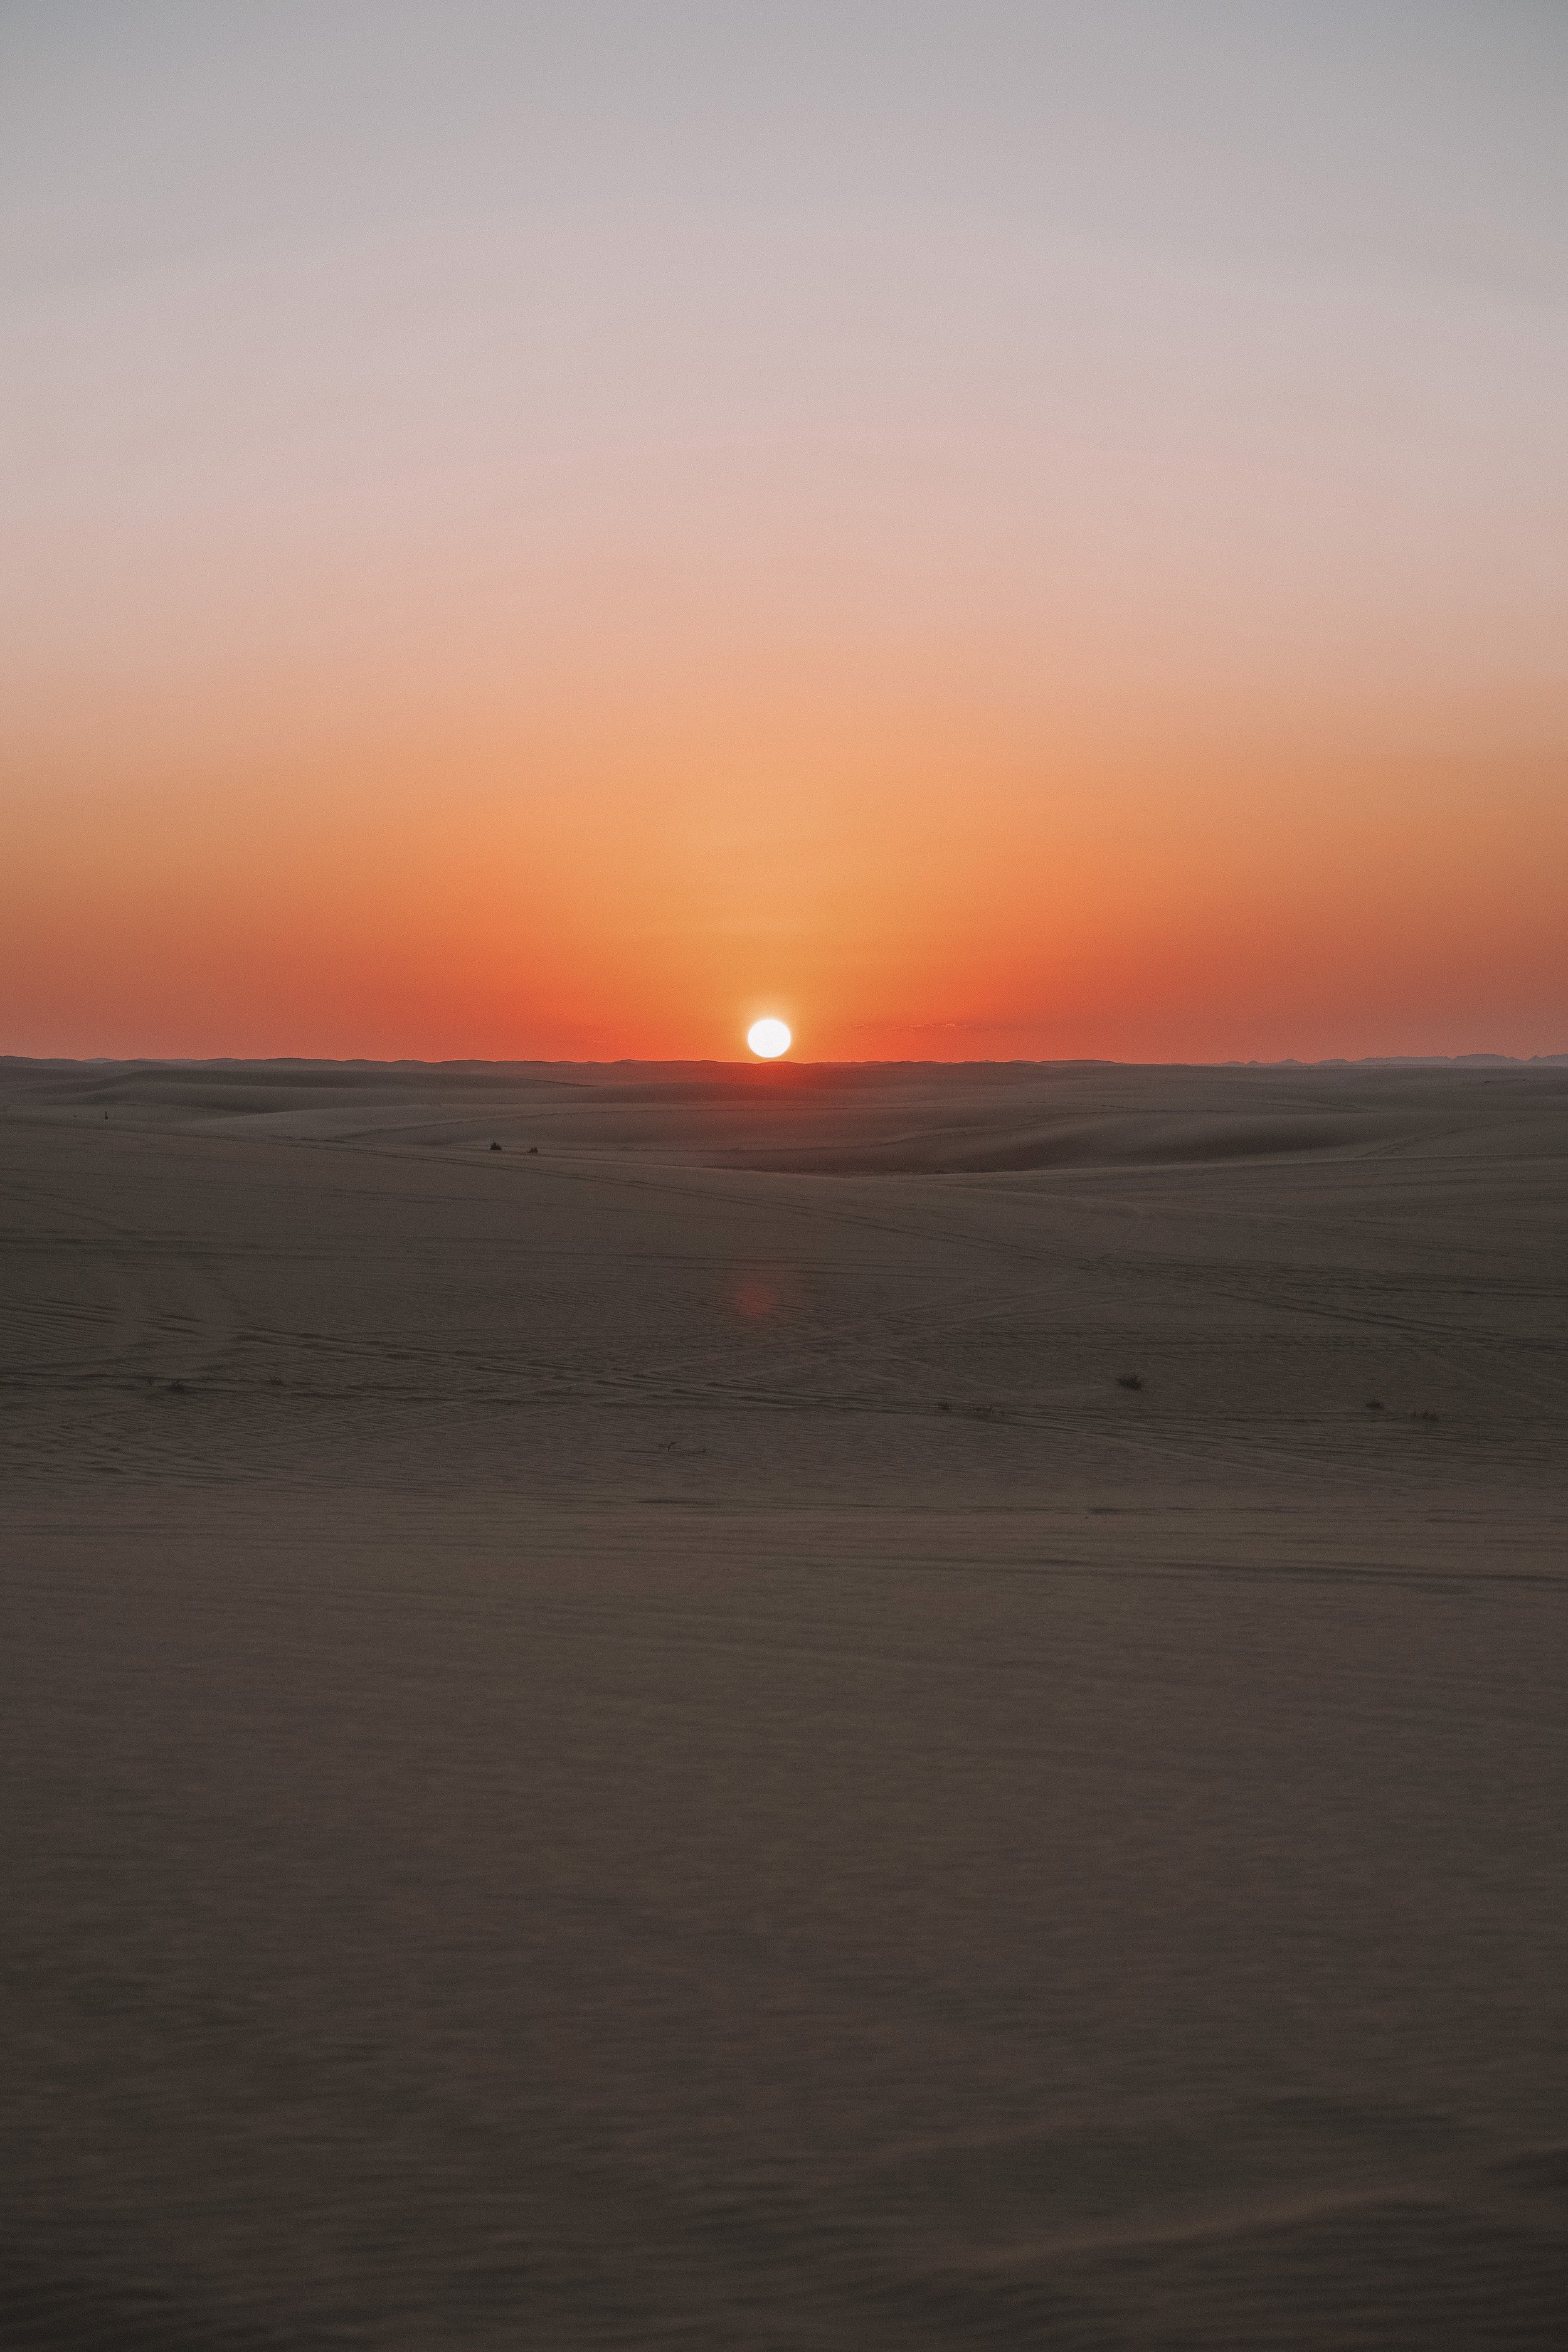 Watching the sunset in the desert - Siwa Oasis - Egypt